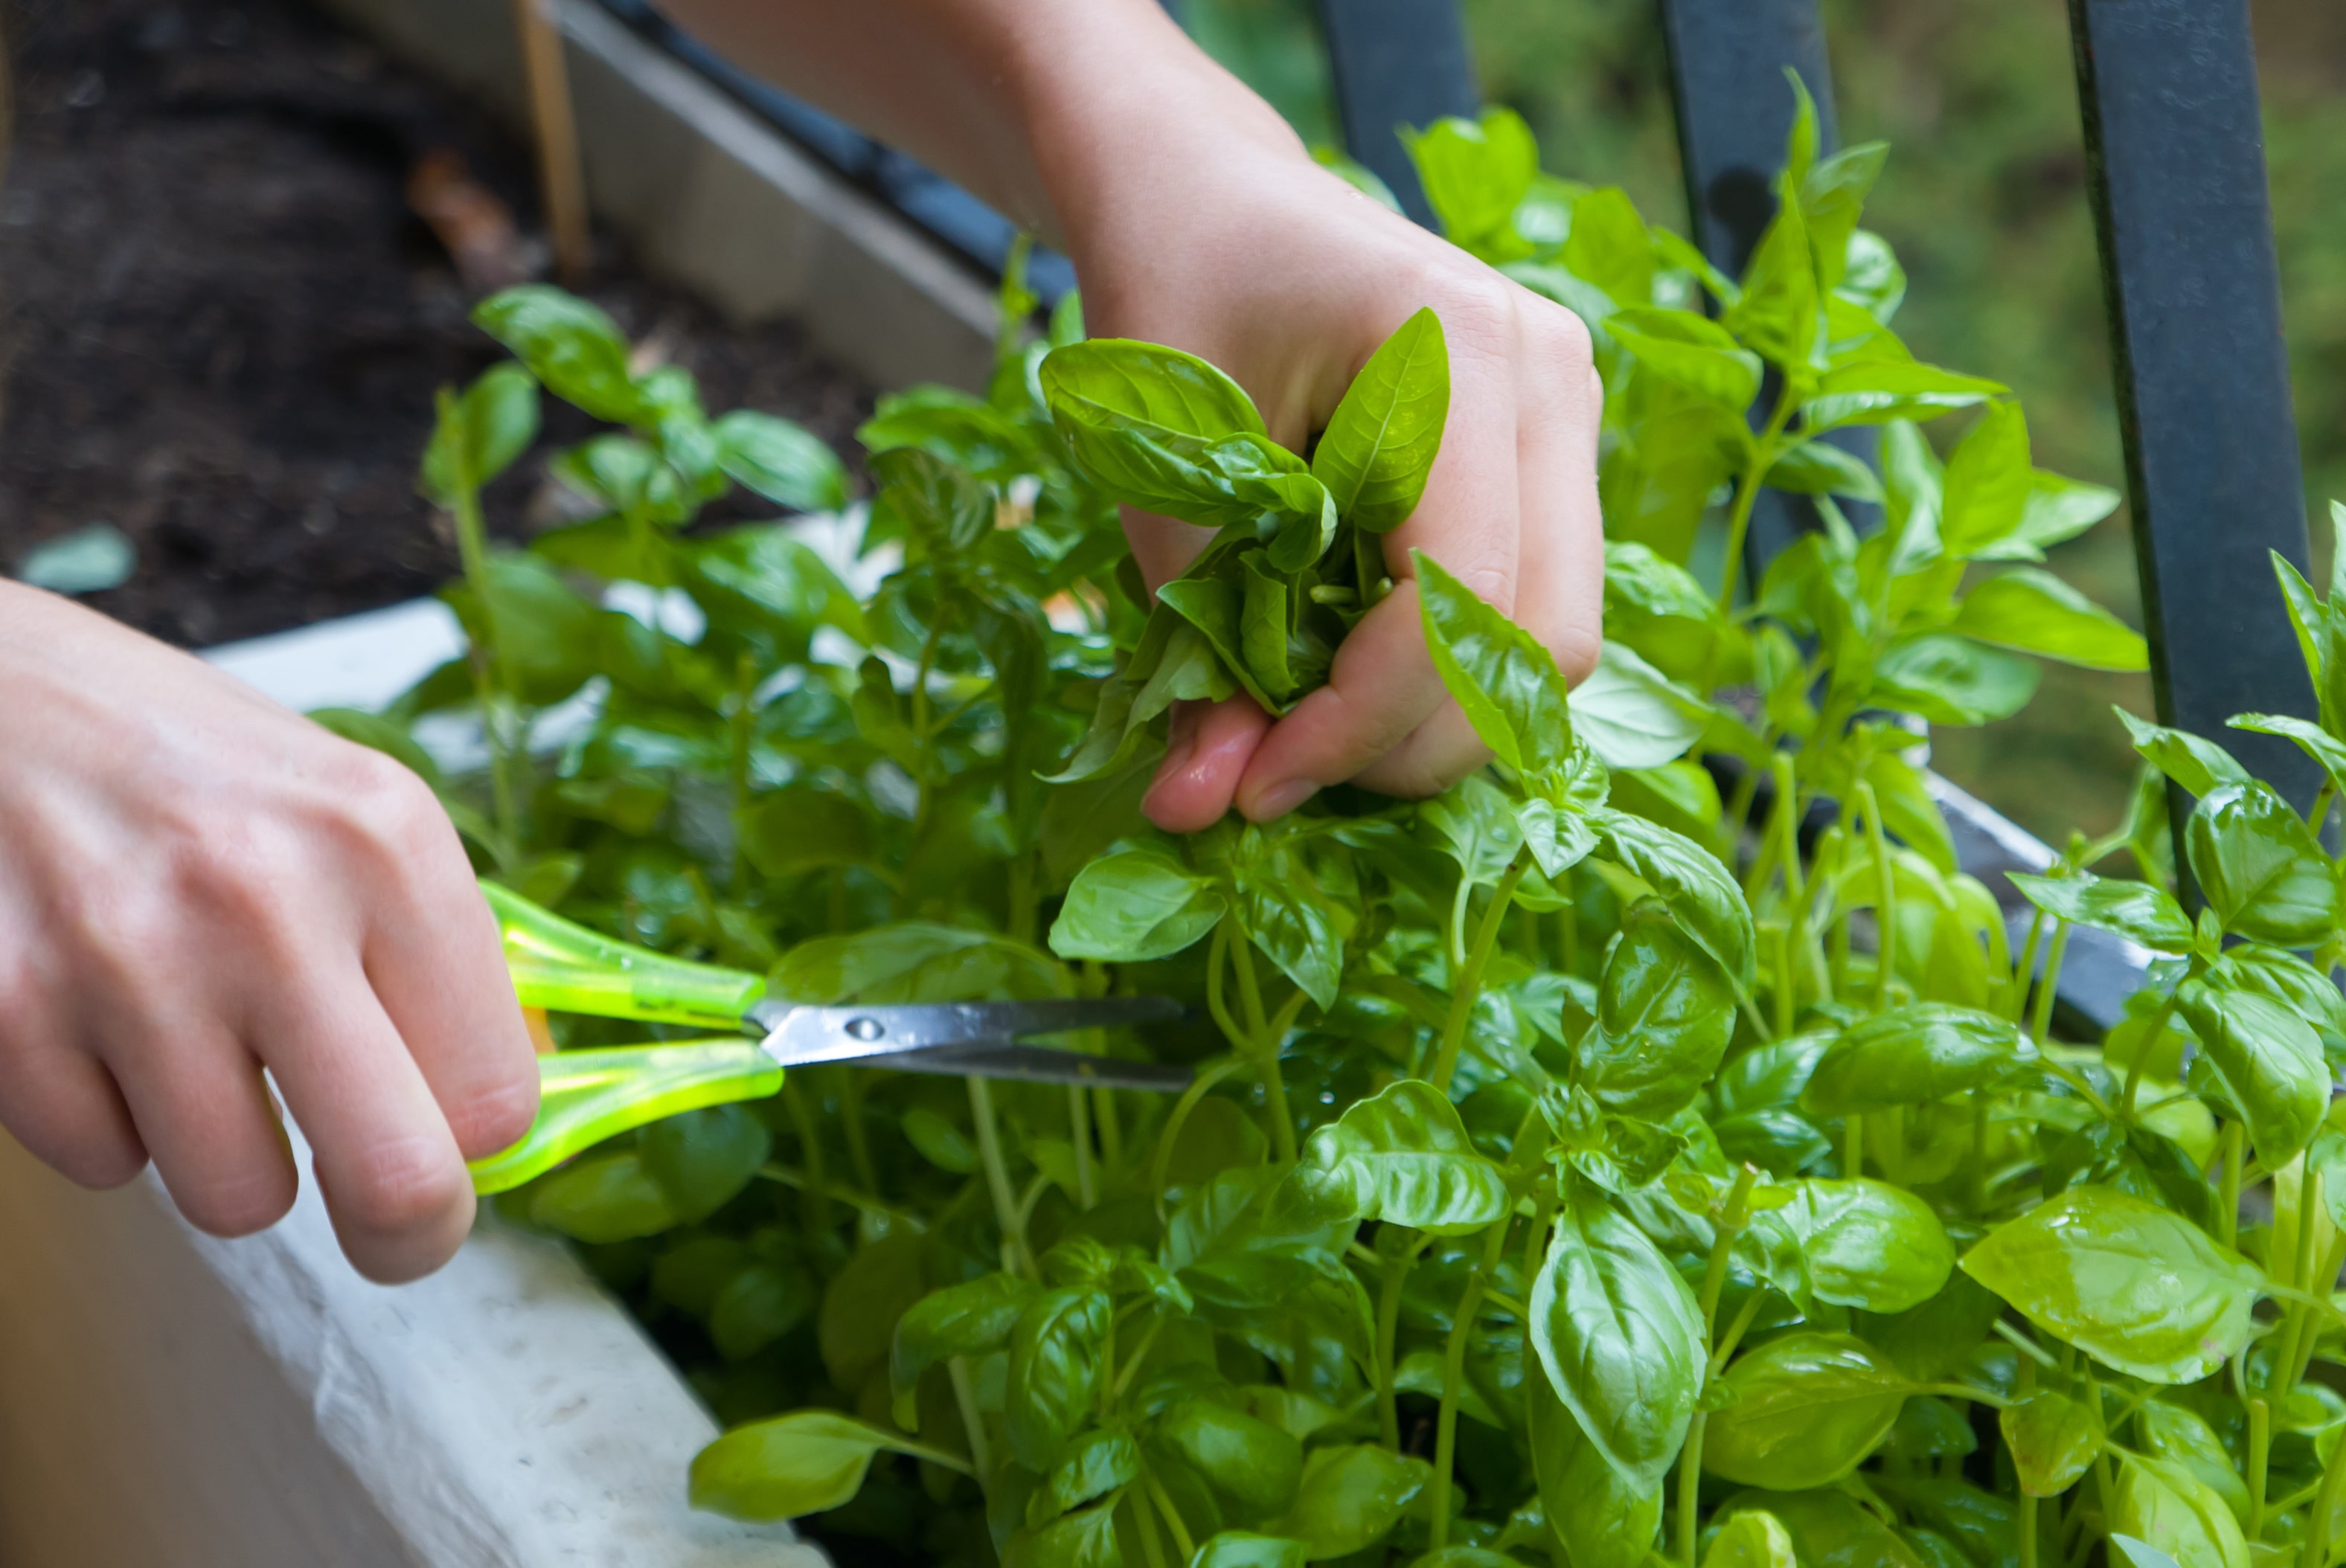 Home gardening, cutting herbs with paper scissors